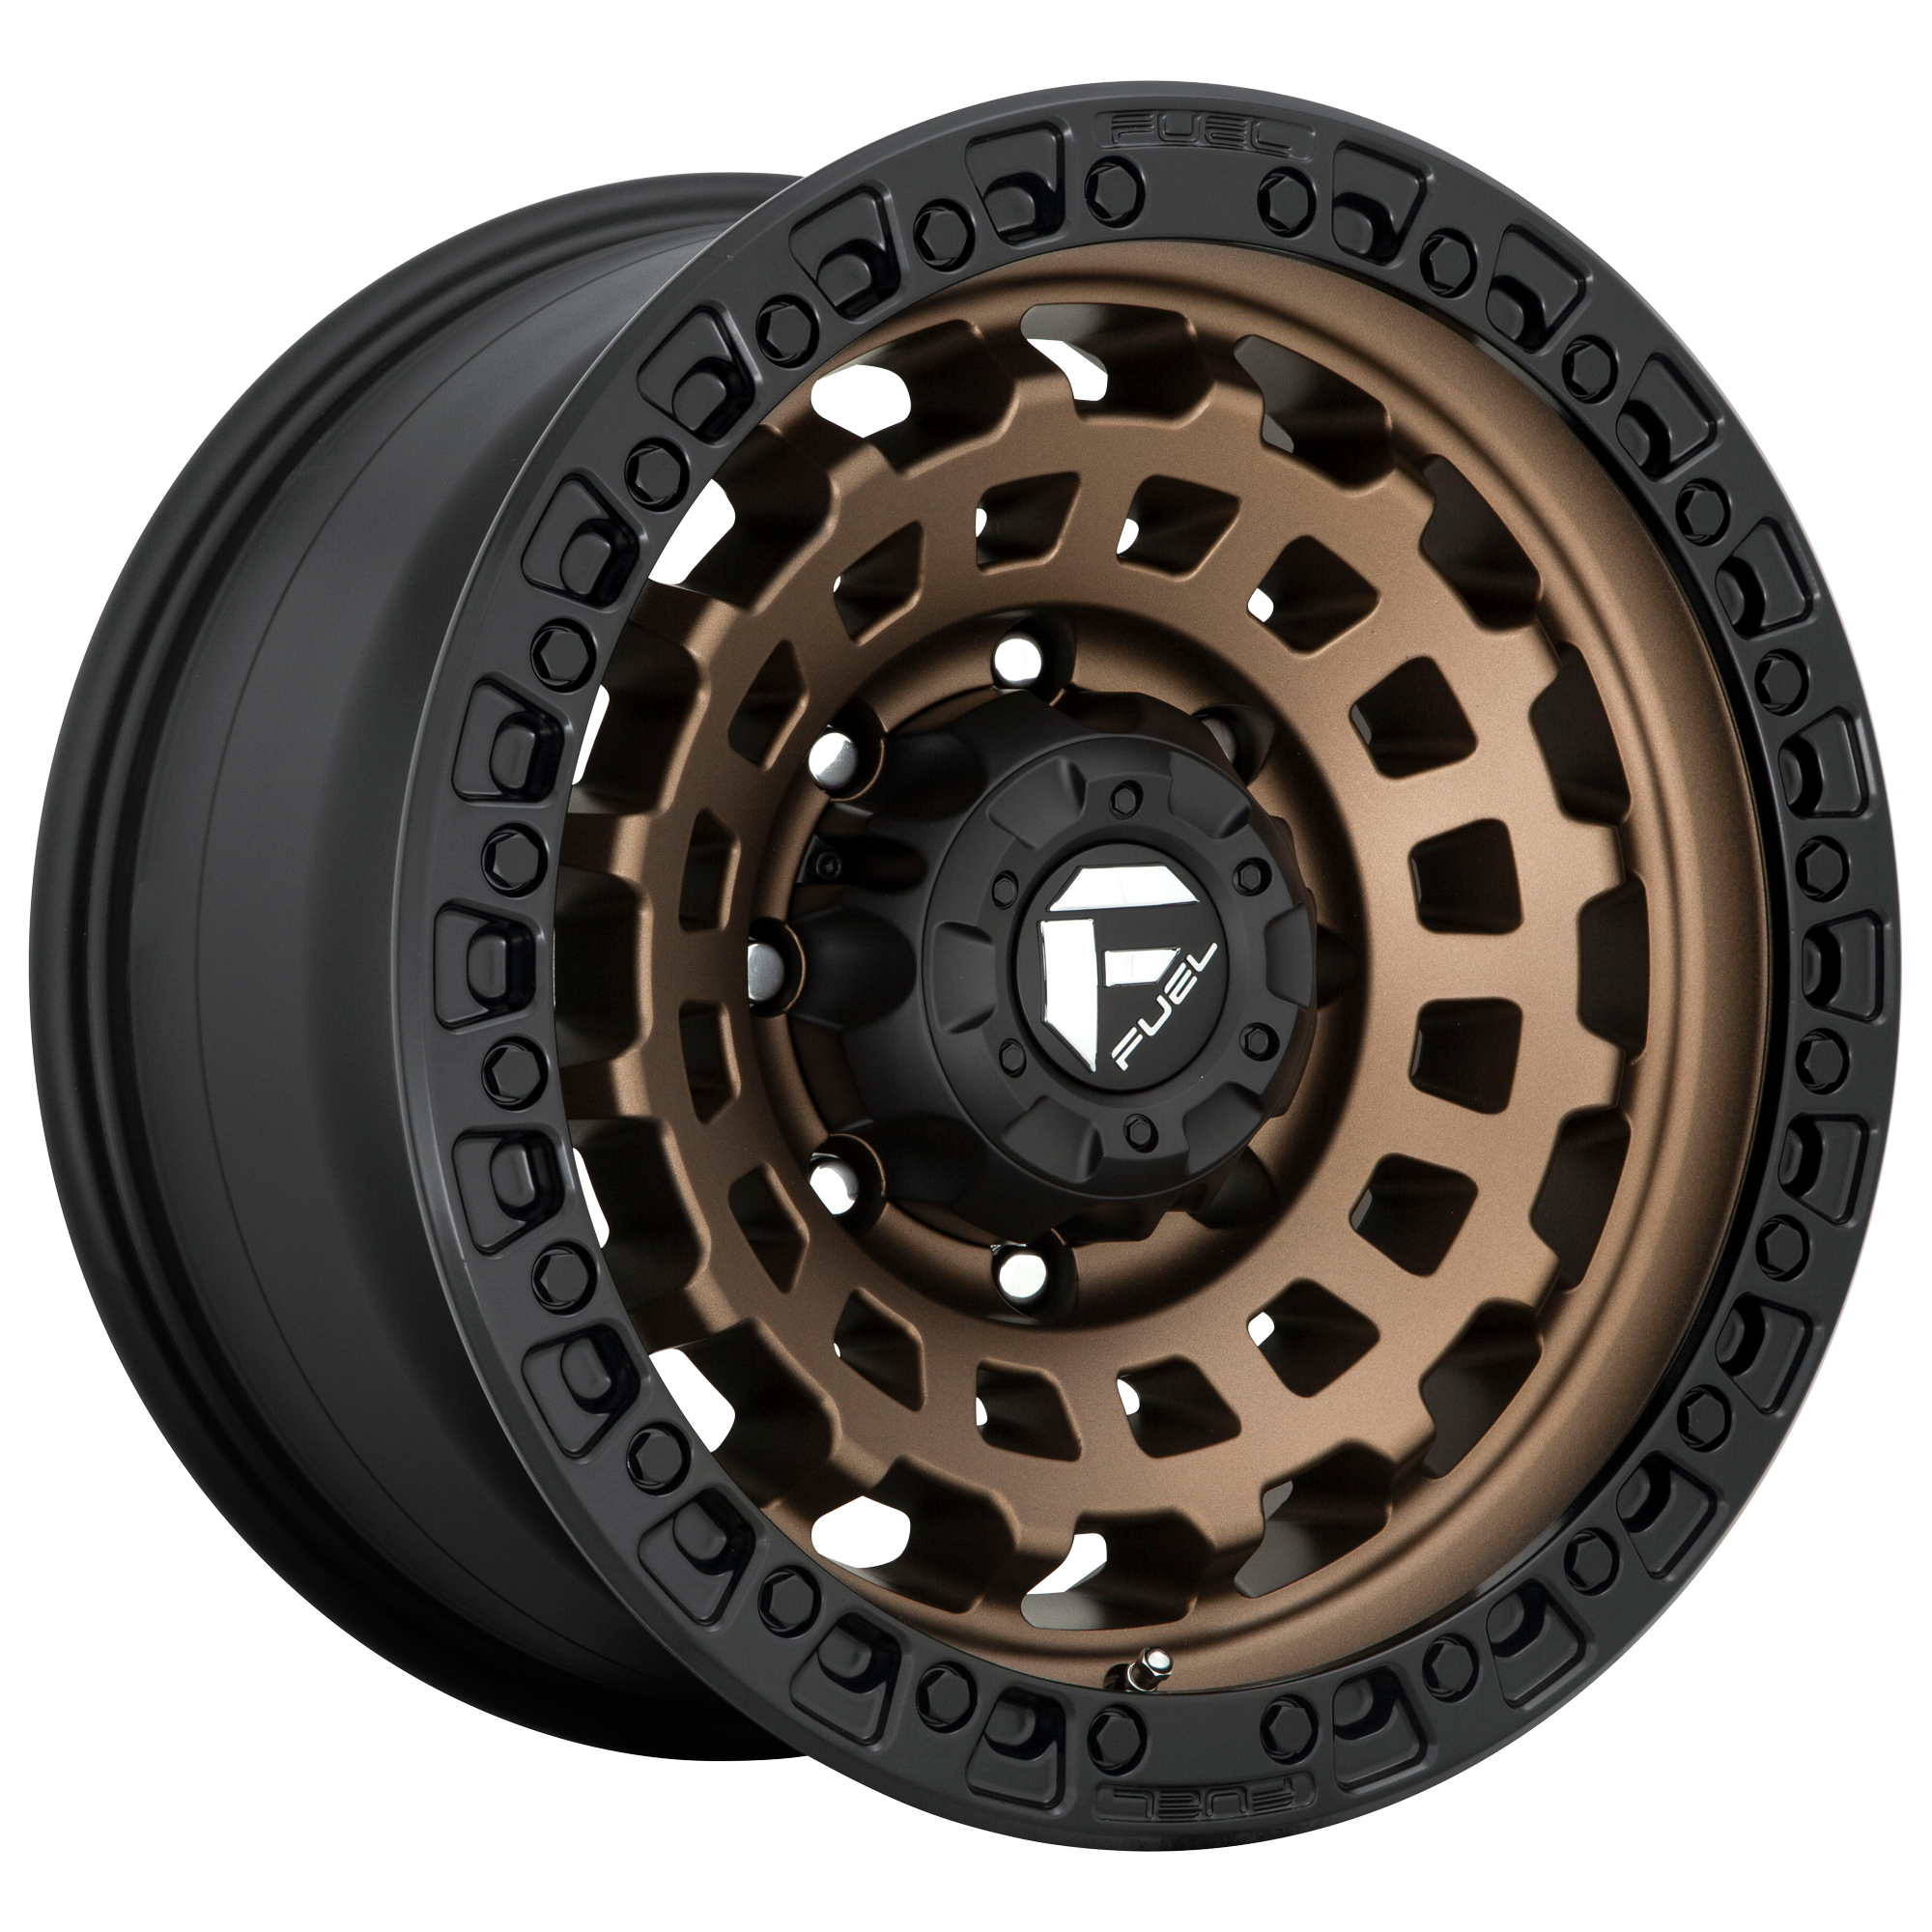 ZEPHYR 20x9 5x150.00 MATTE BRONZE BLACK BEAD RING (1 mm) - Tires and Engine Performance